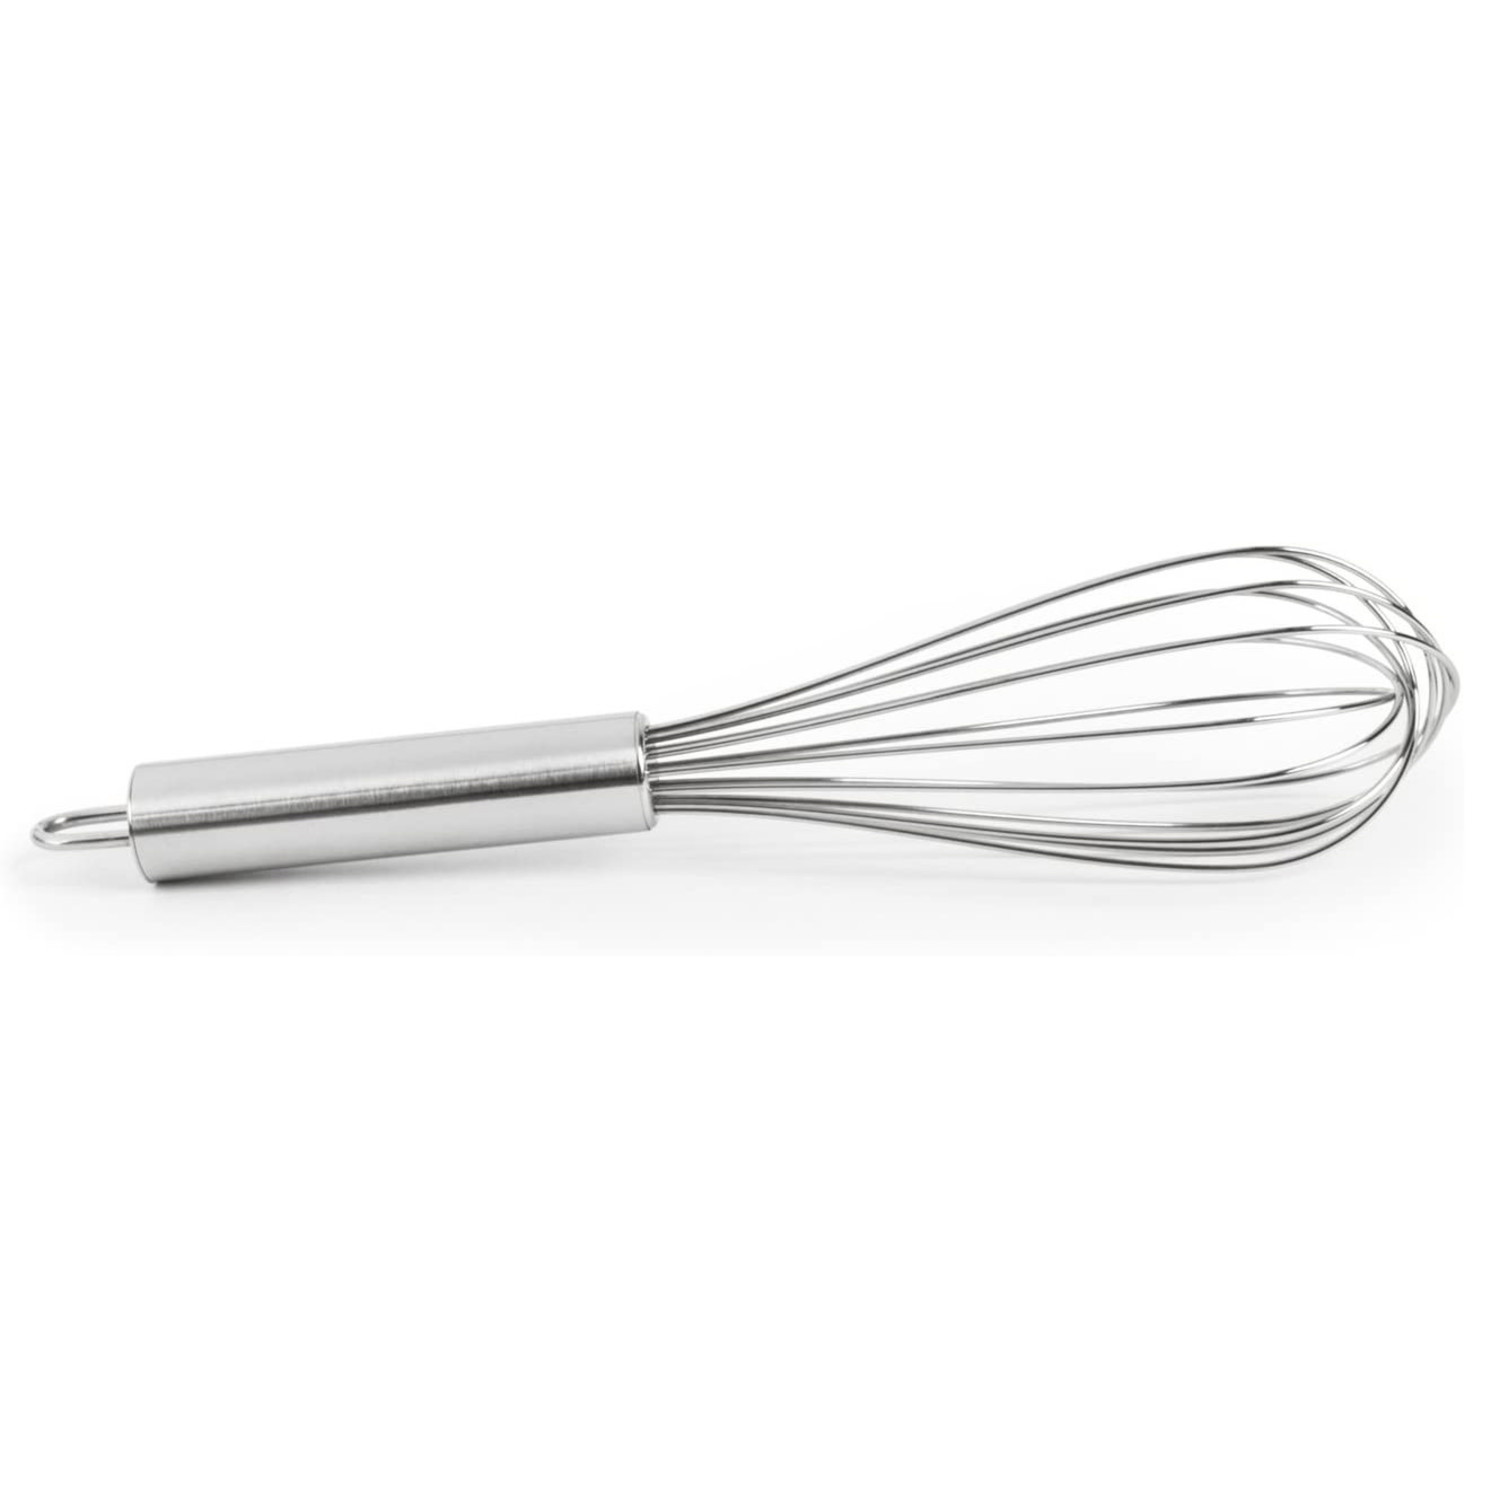 Rösle Basics Line Egg whisk with 12 in. Stainless Steel Handle